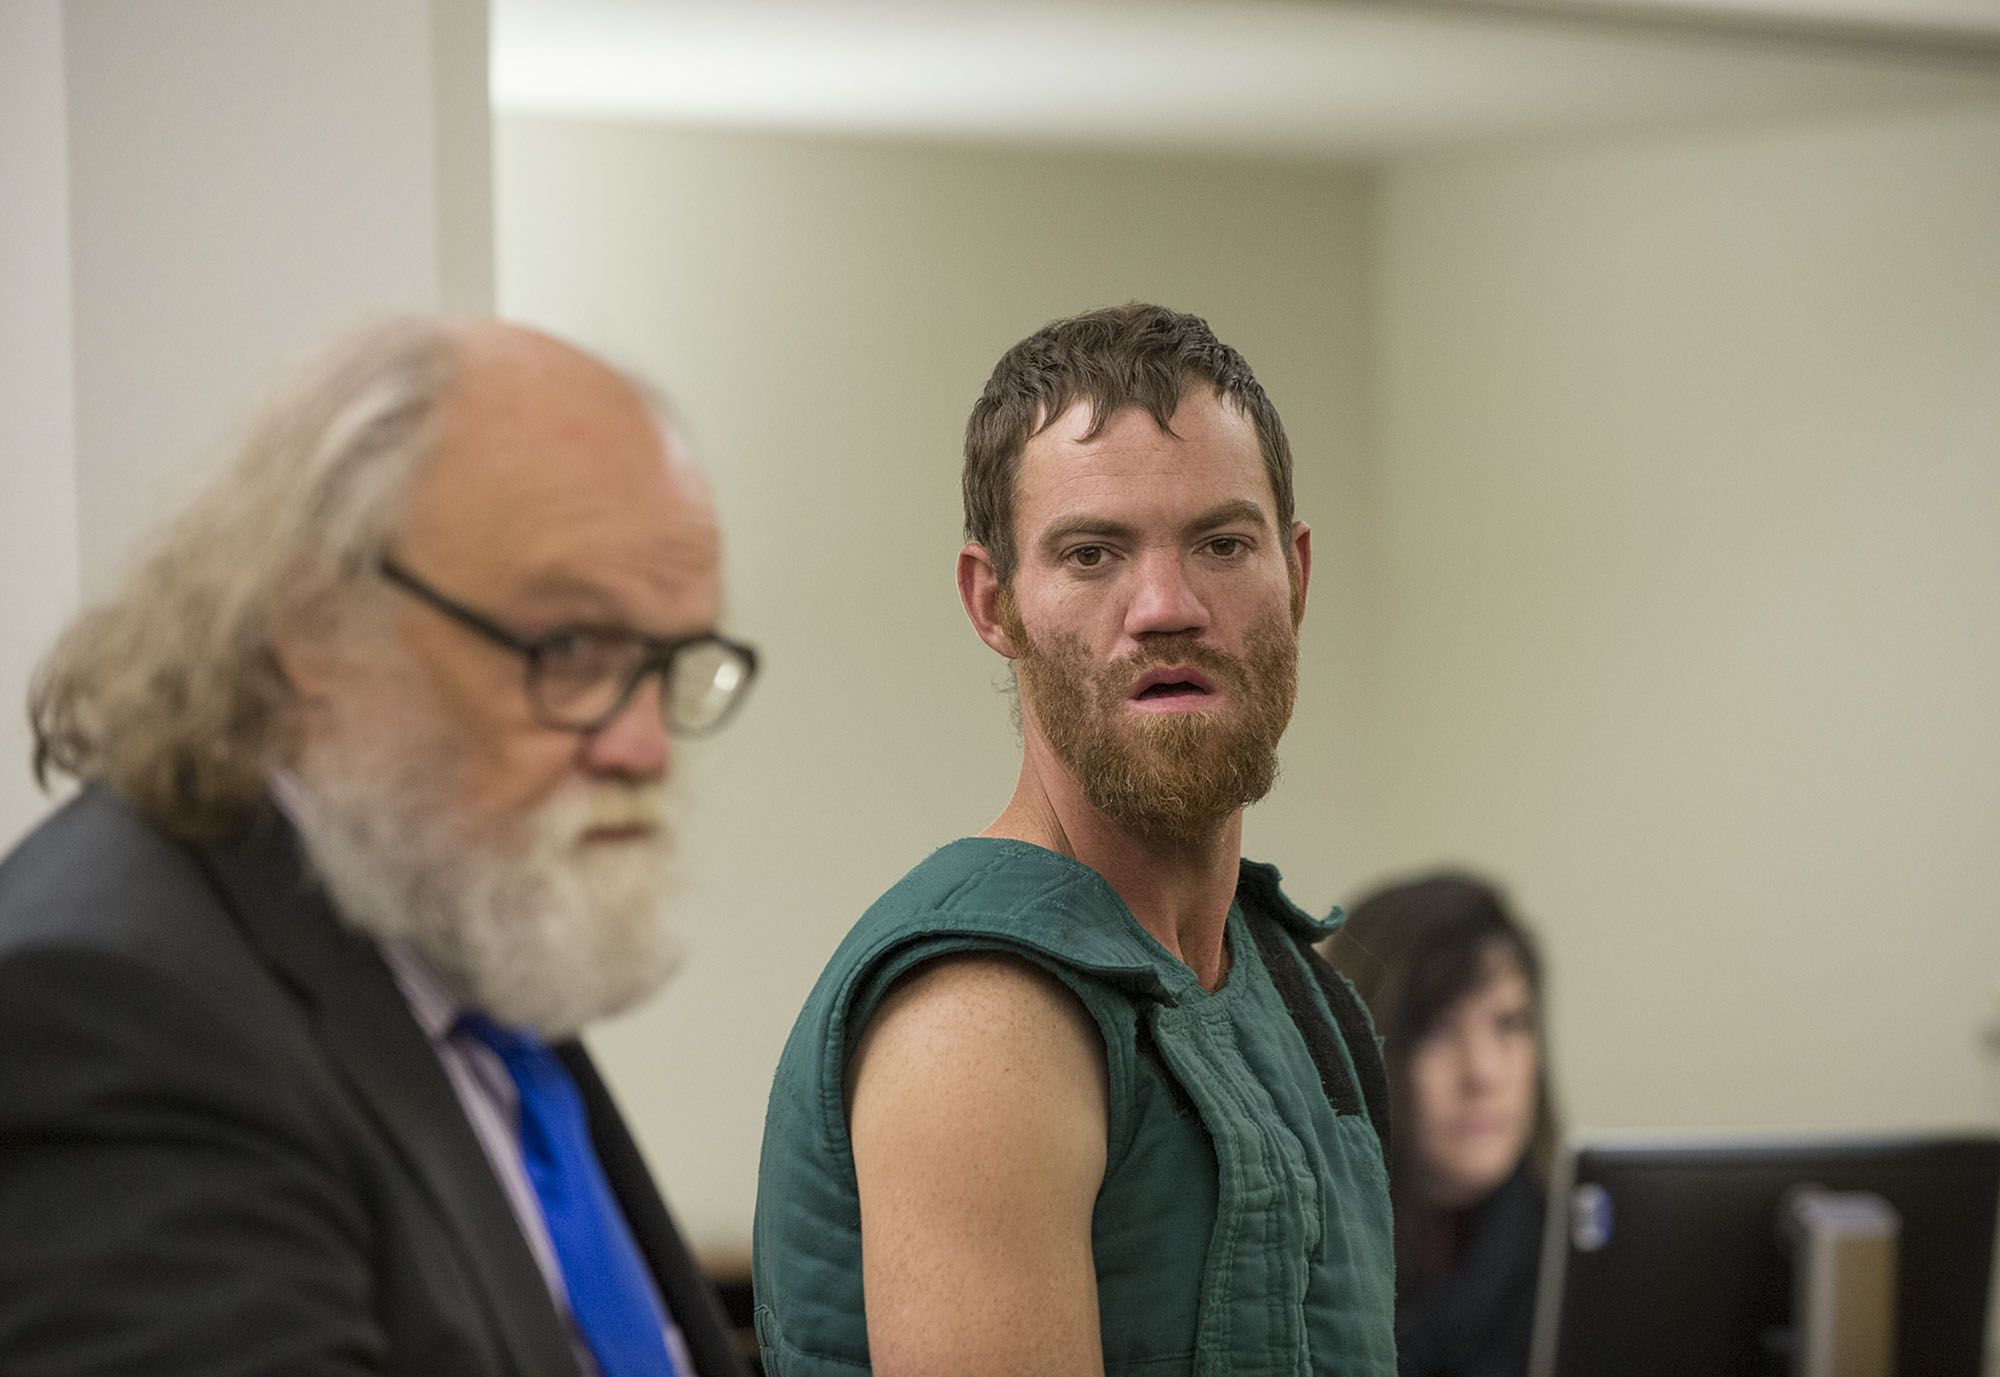 Shaun Michael Sprague, center, who is accused of opening fire inside the Hazel Dell Wal-Mart on Wednesday morning, makes a first appearance Thursday in Clark County Superior Court (Amanda Cowan/The Columbian)